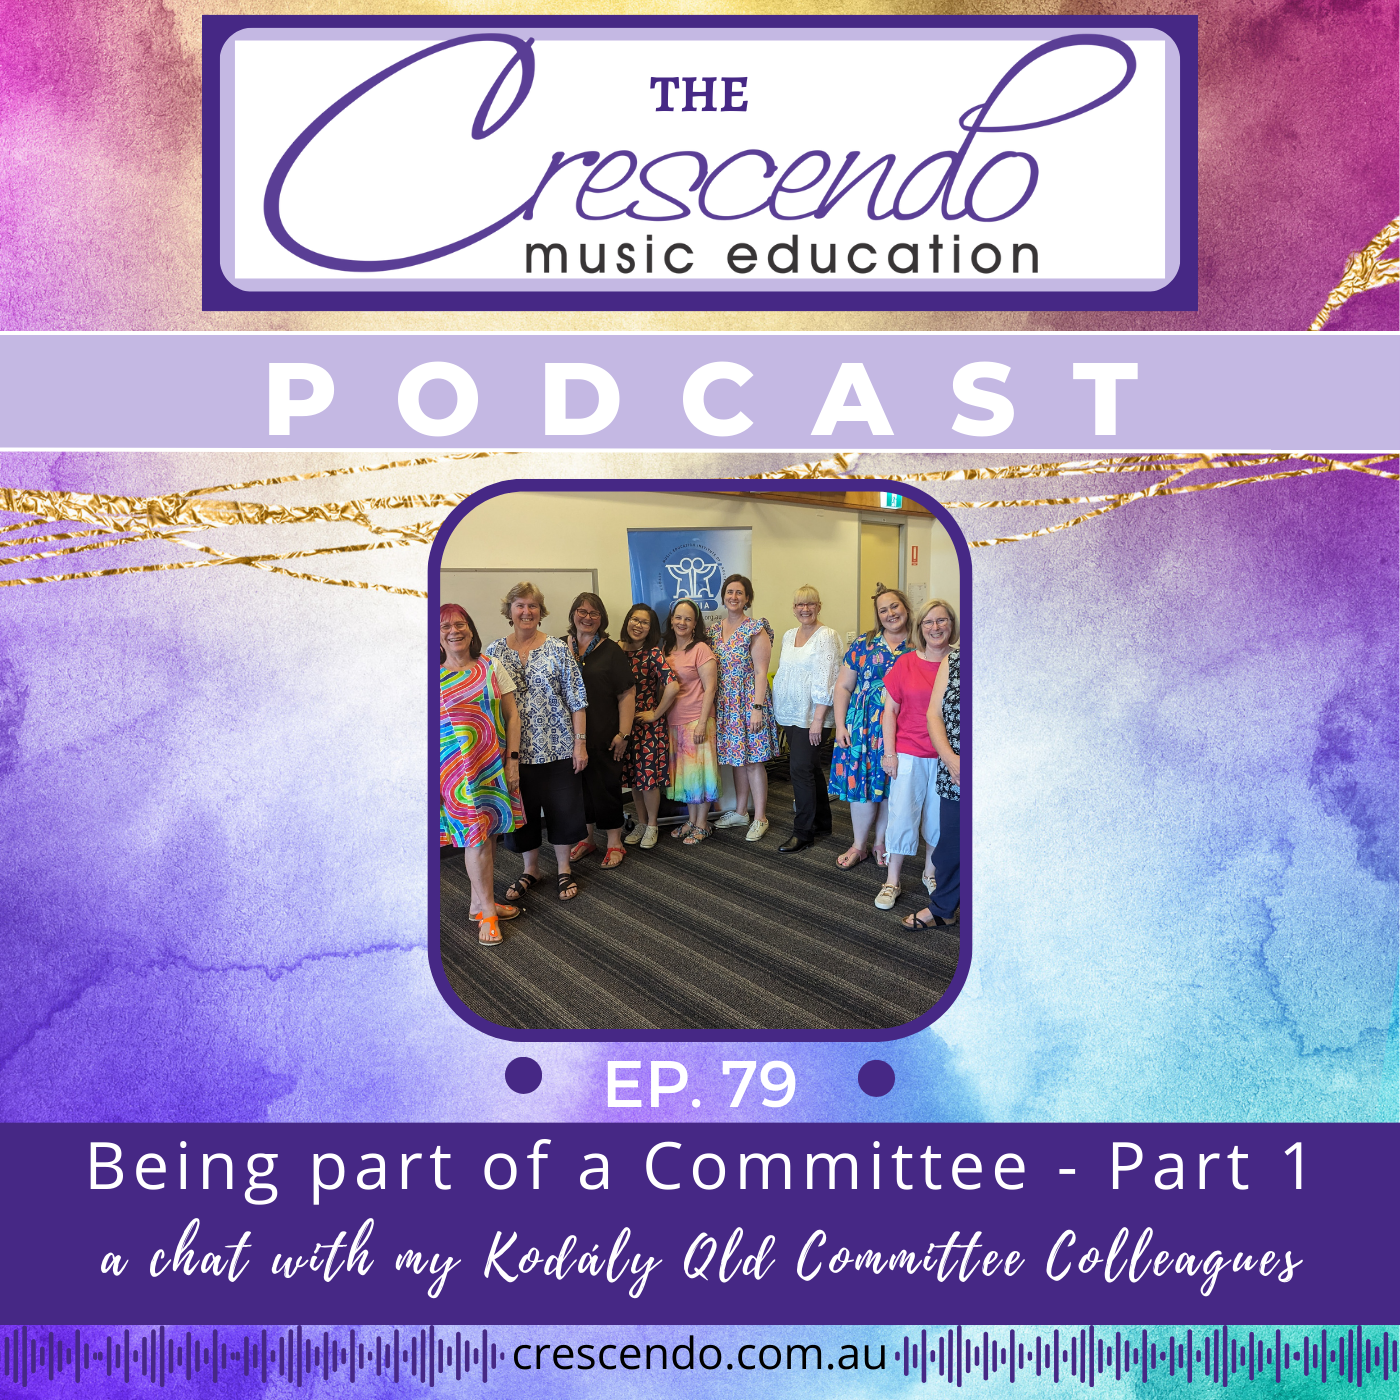 We're about to dive into the wonderful world of Kodály Committees, where every music teacher should be a part of the harmonious action!